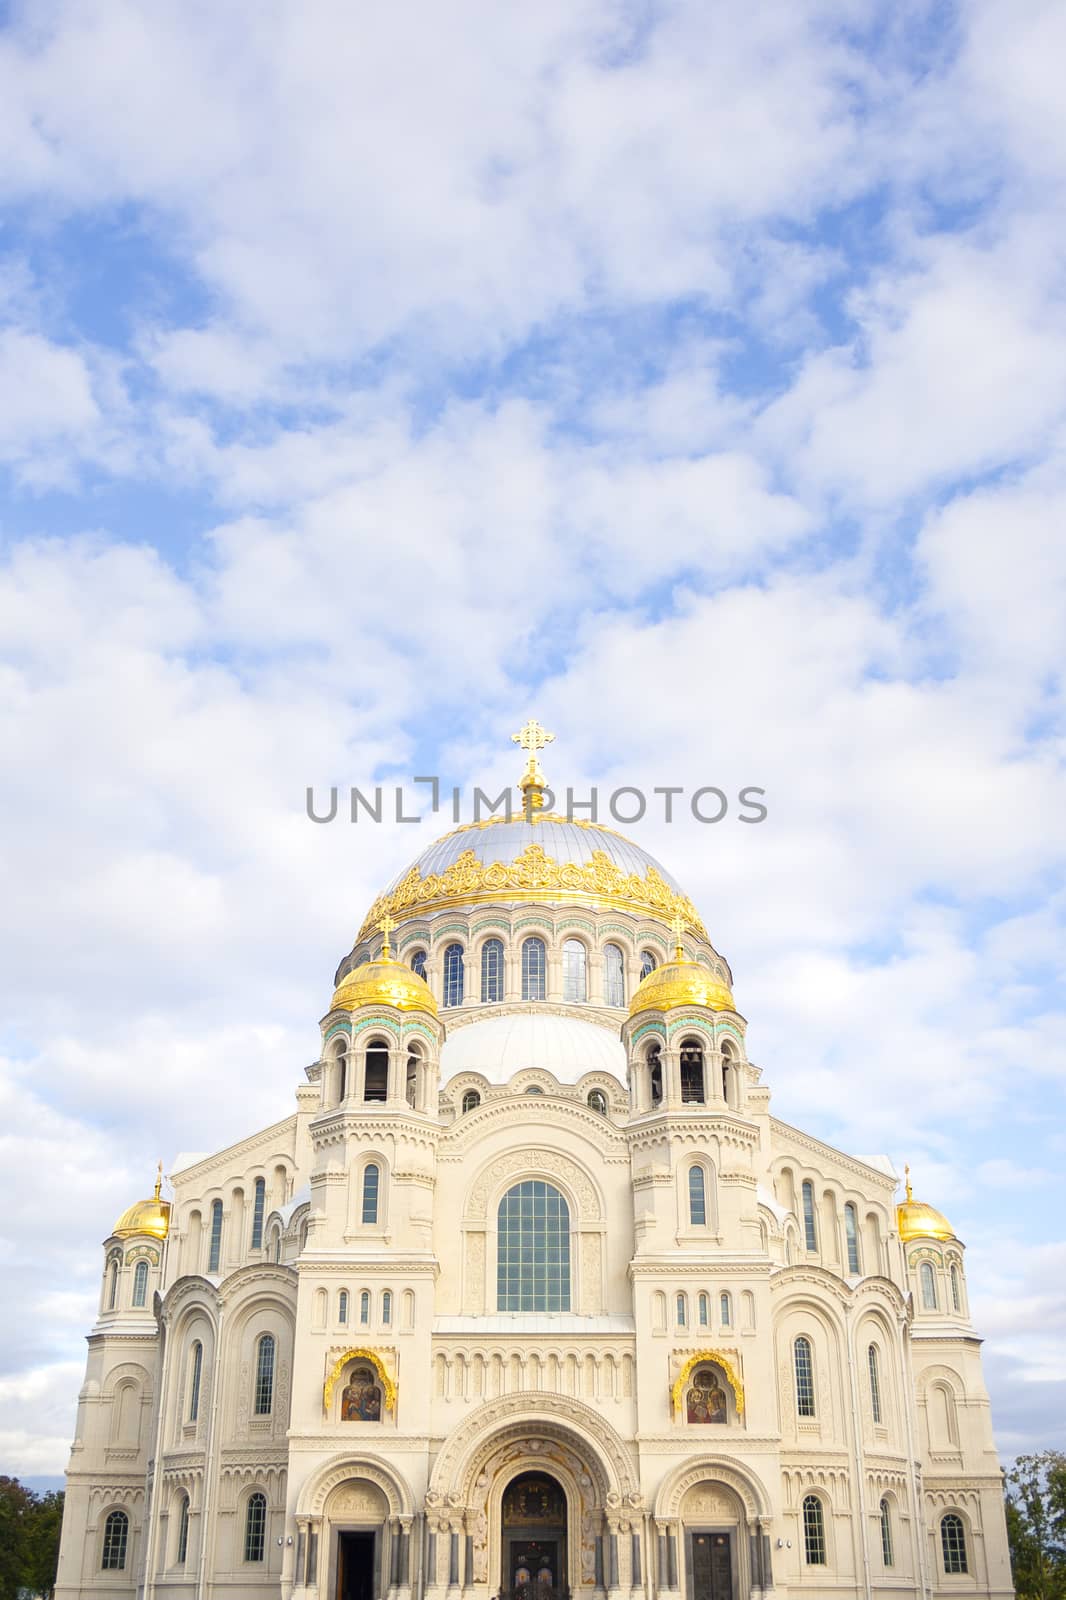 Nicholas the wonderworker's church on Anchor square in kronstadt town Saint Petersburg. Naval christian cathedral church in russia with golden dome, unesco architecture at sunny day vertical image